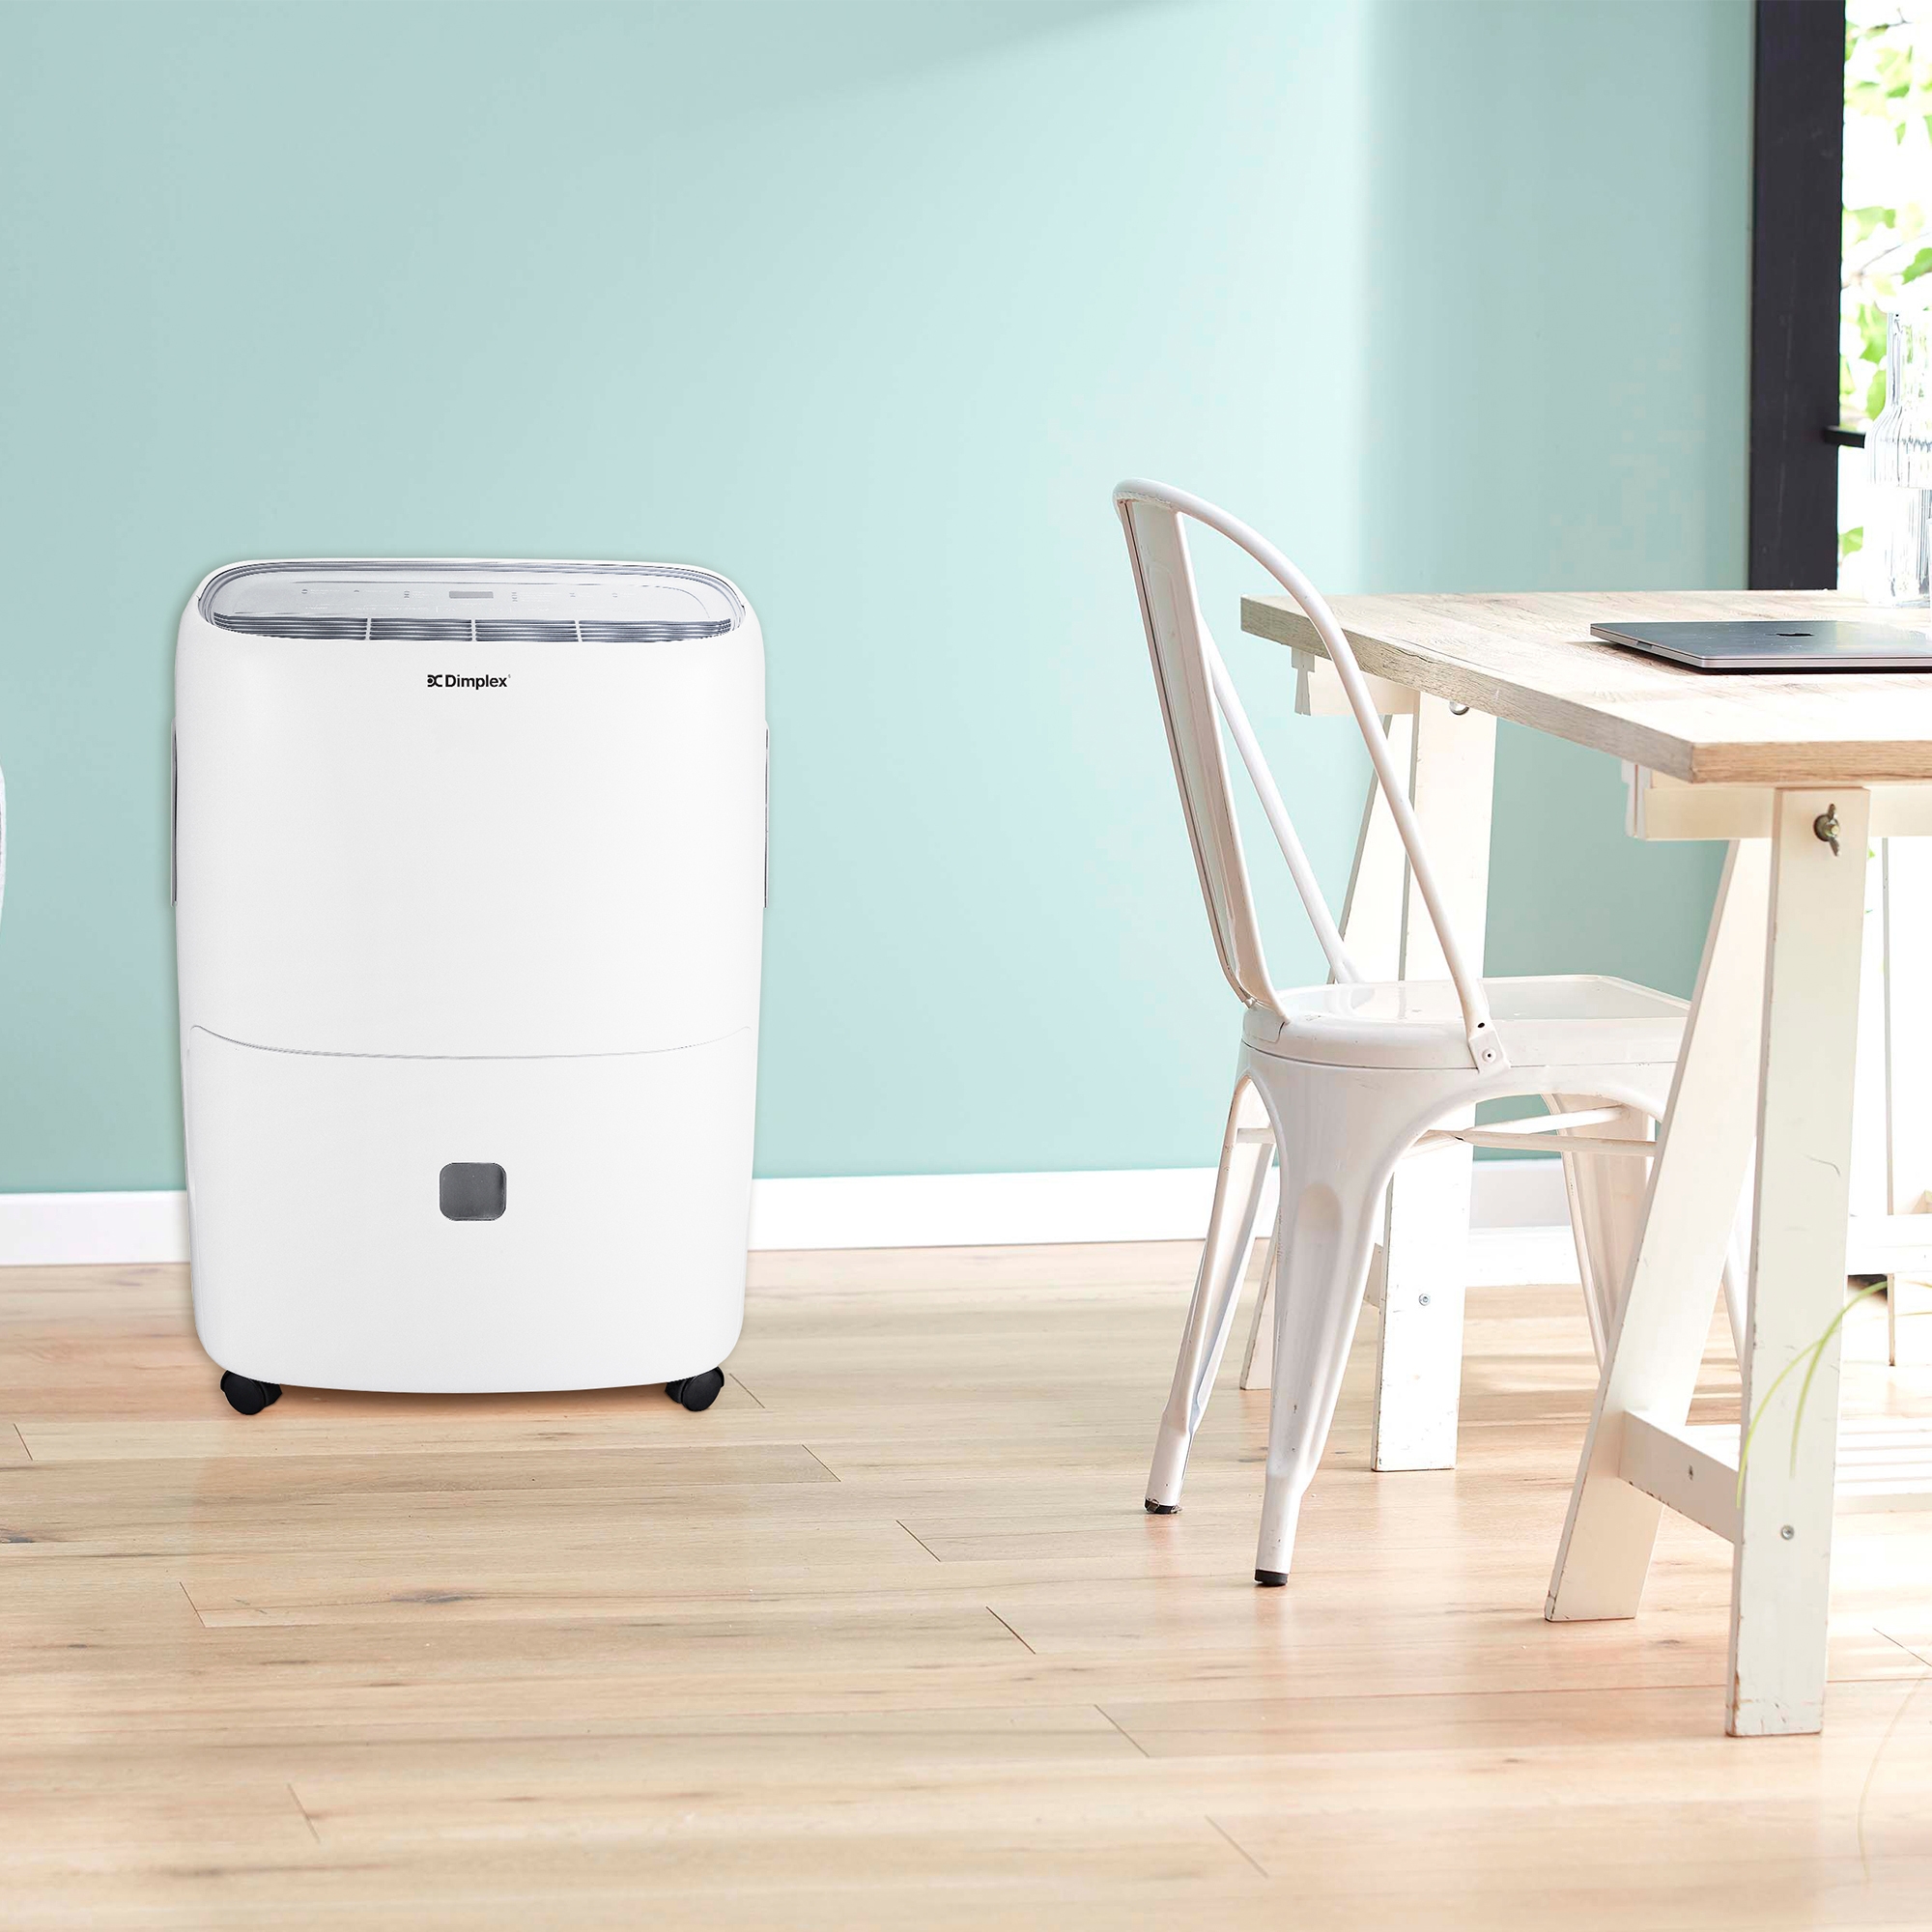 Dimplex Dehumidifier with Electronic Controls 25L Image 2